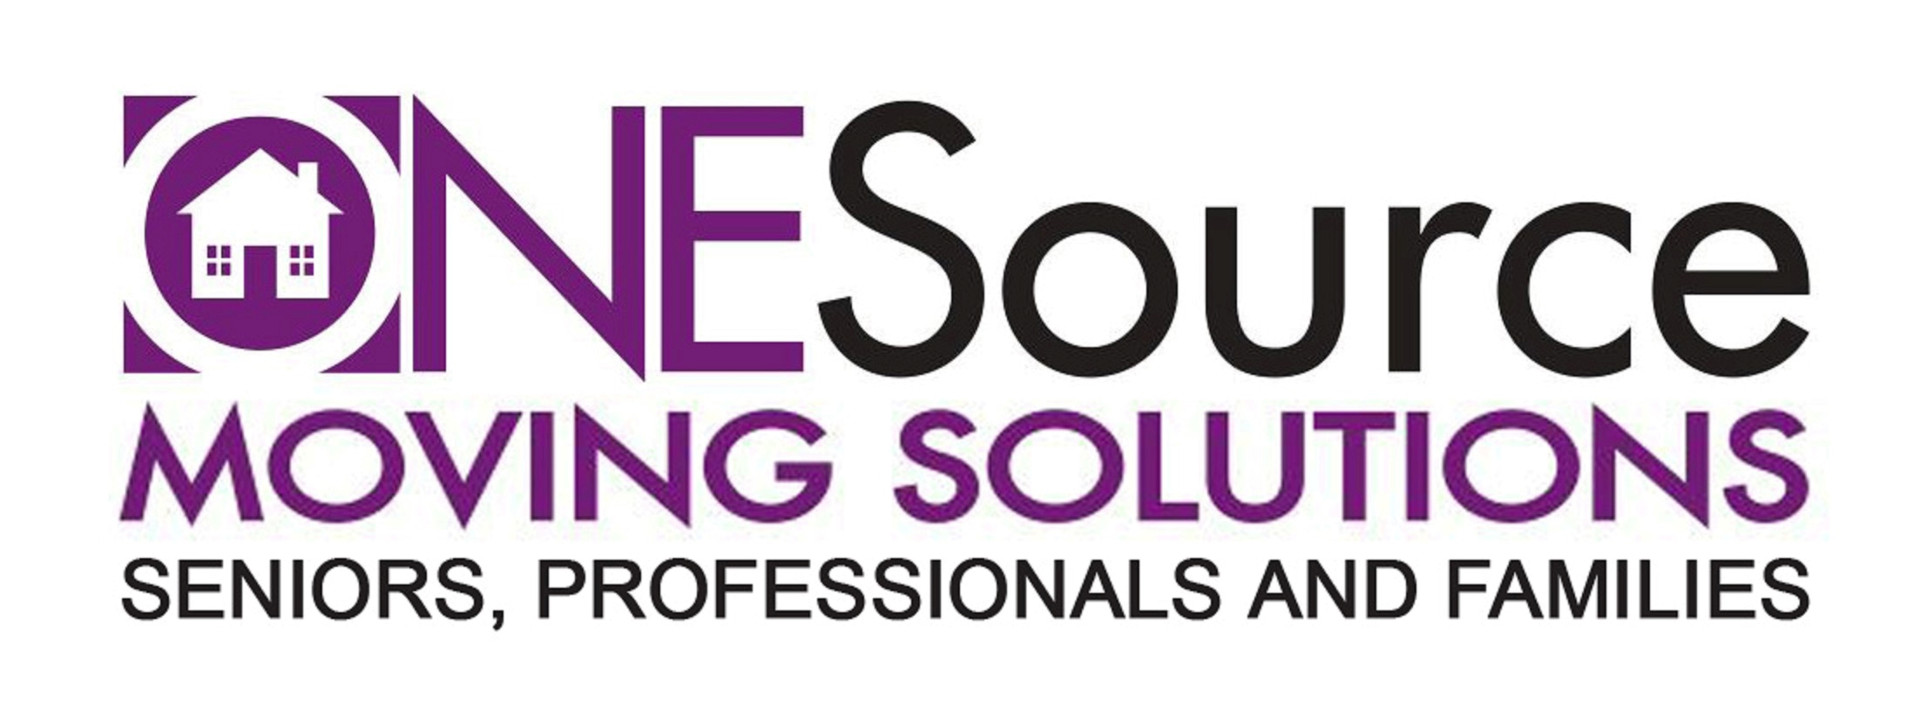 ONESOURCE MOVING SOLUTIONS FOR SENIORS